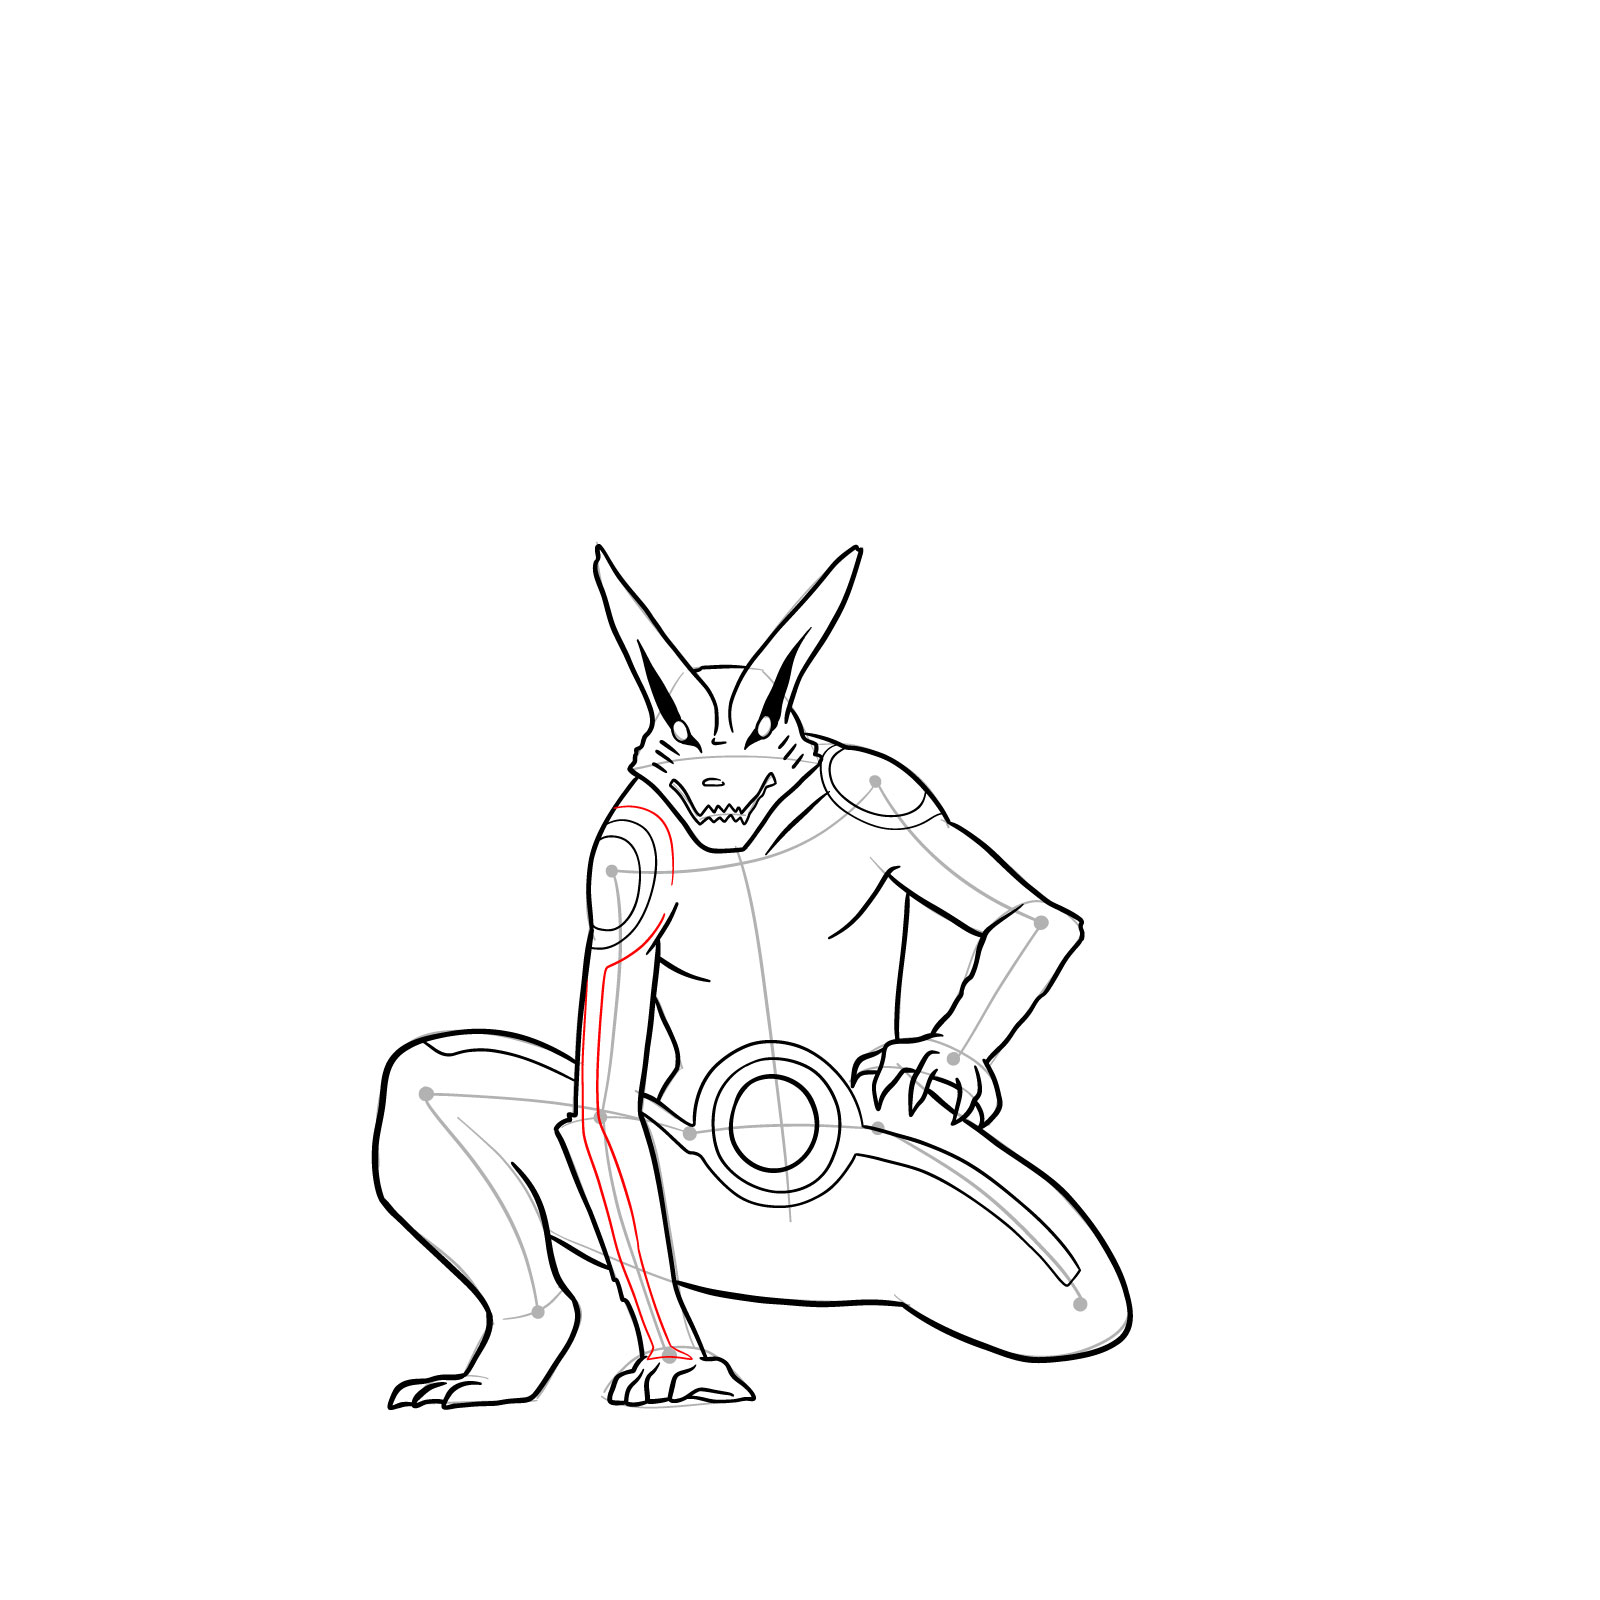 How to Draw Naruto's Tailed Beast Mode - step 27